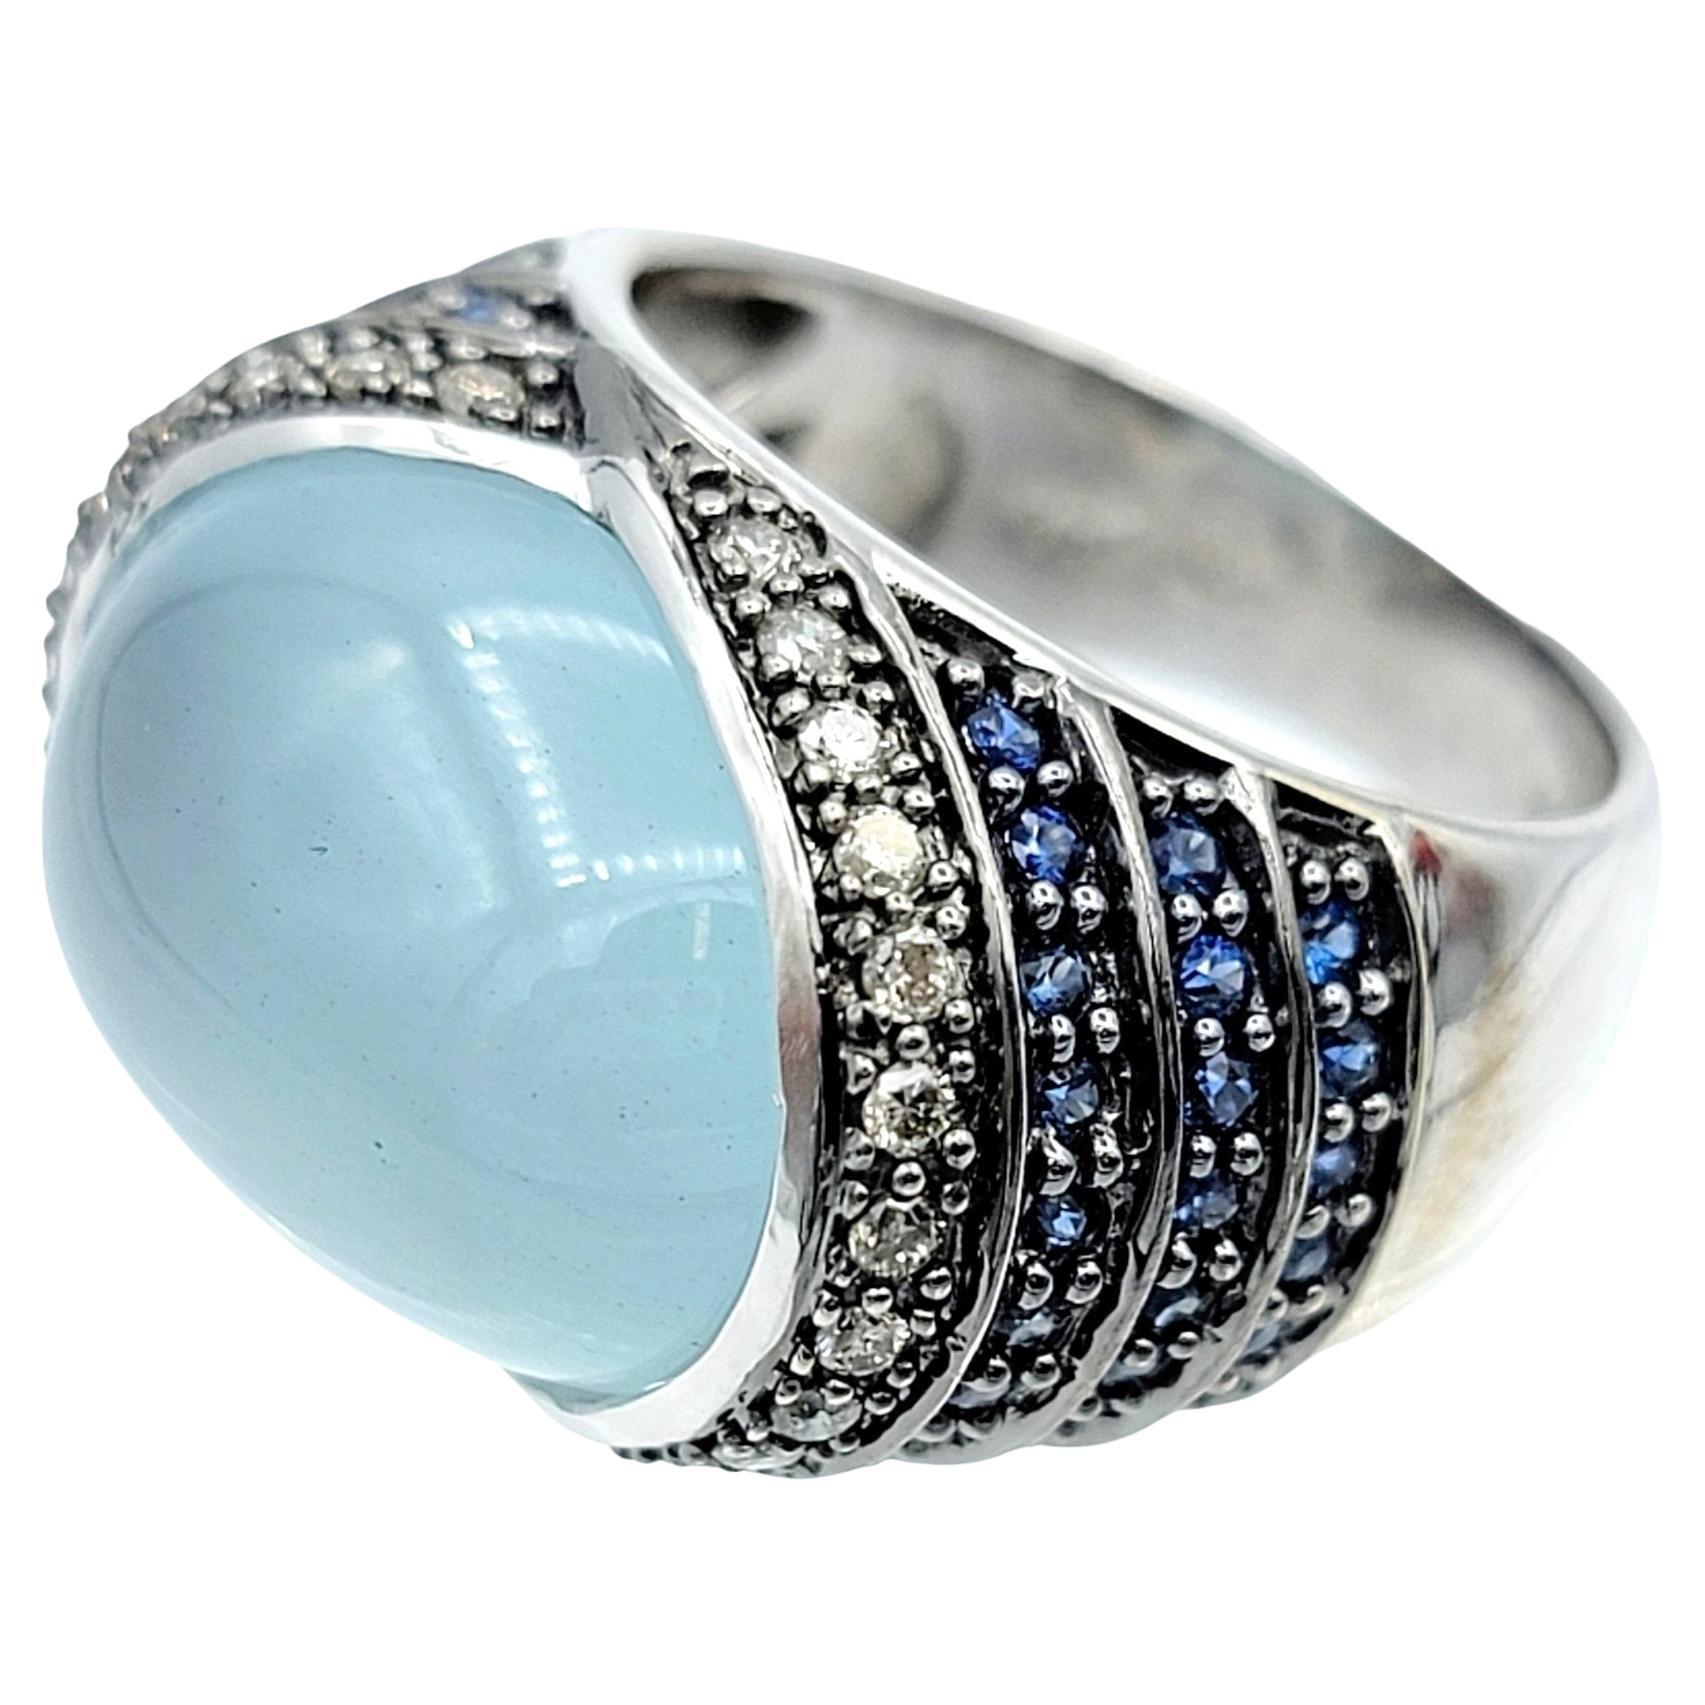 Le Vian Oval Cabochon Moonstone Cocktail Ring with Sapphire & Diamond Accents   For Sale